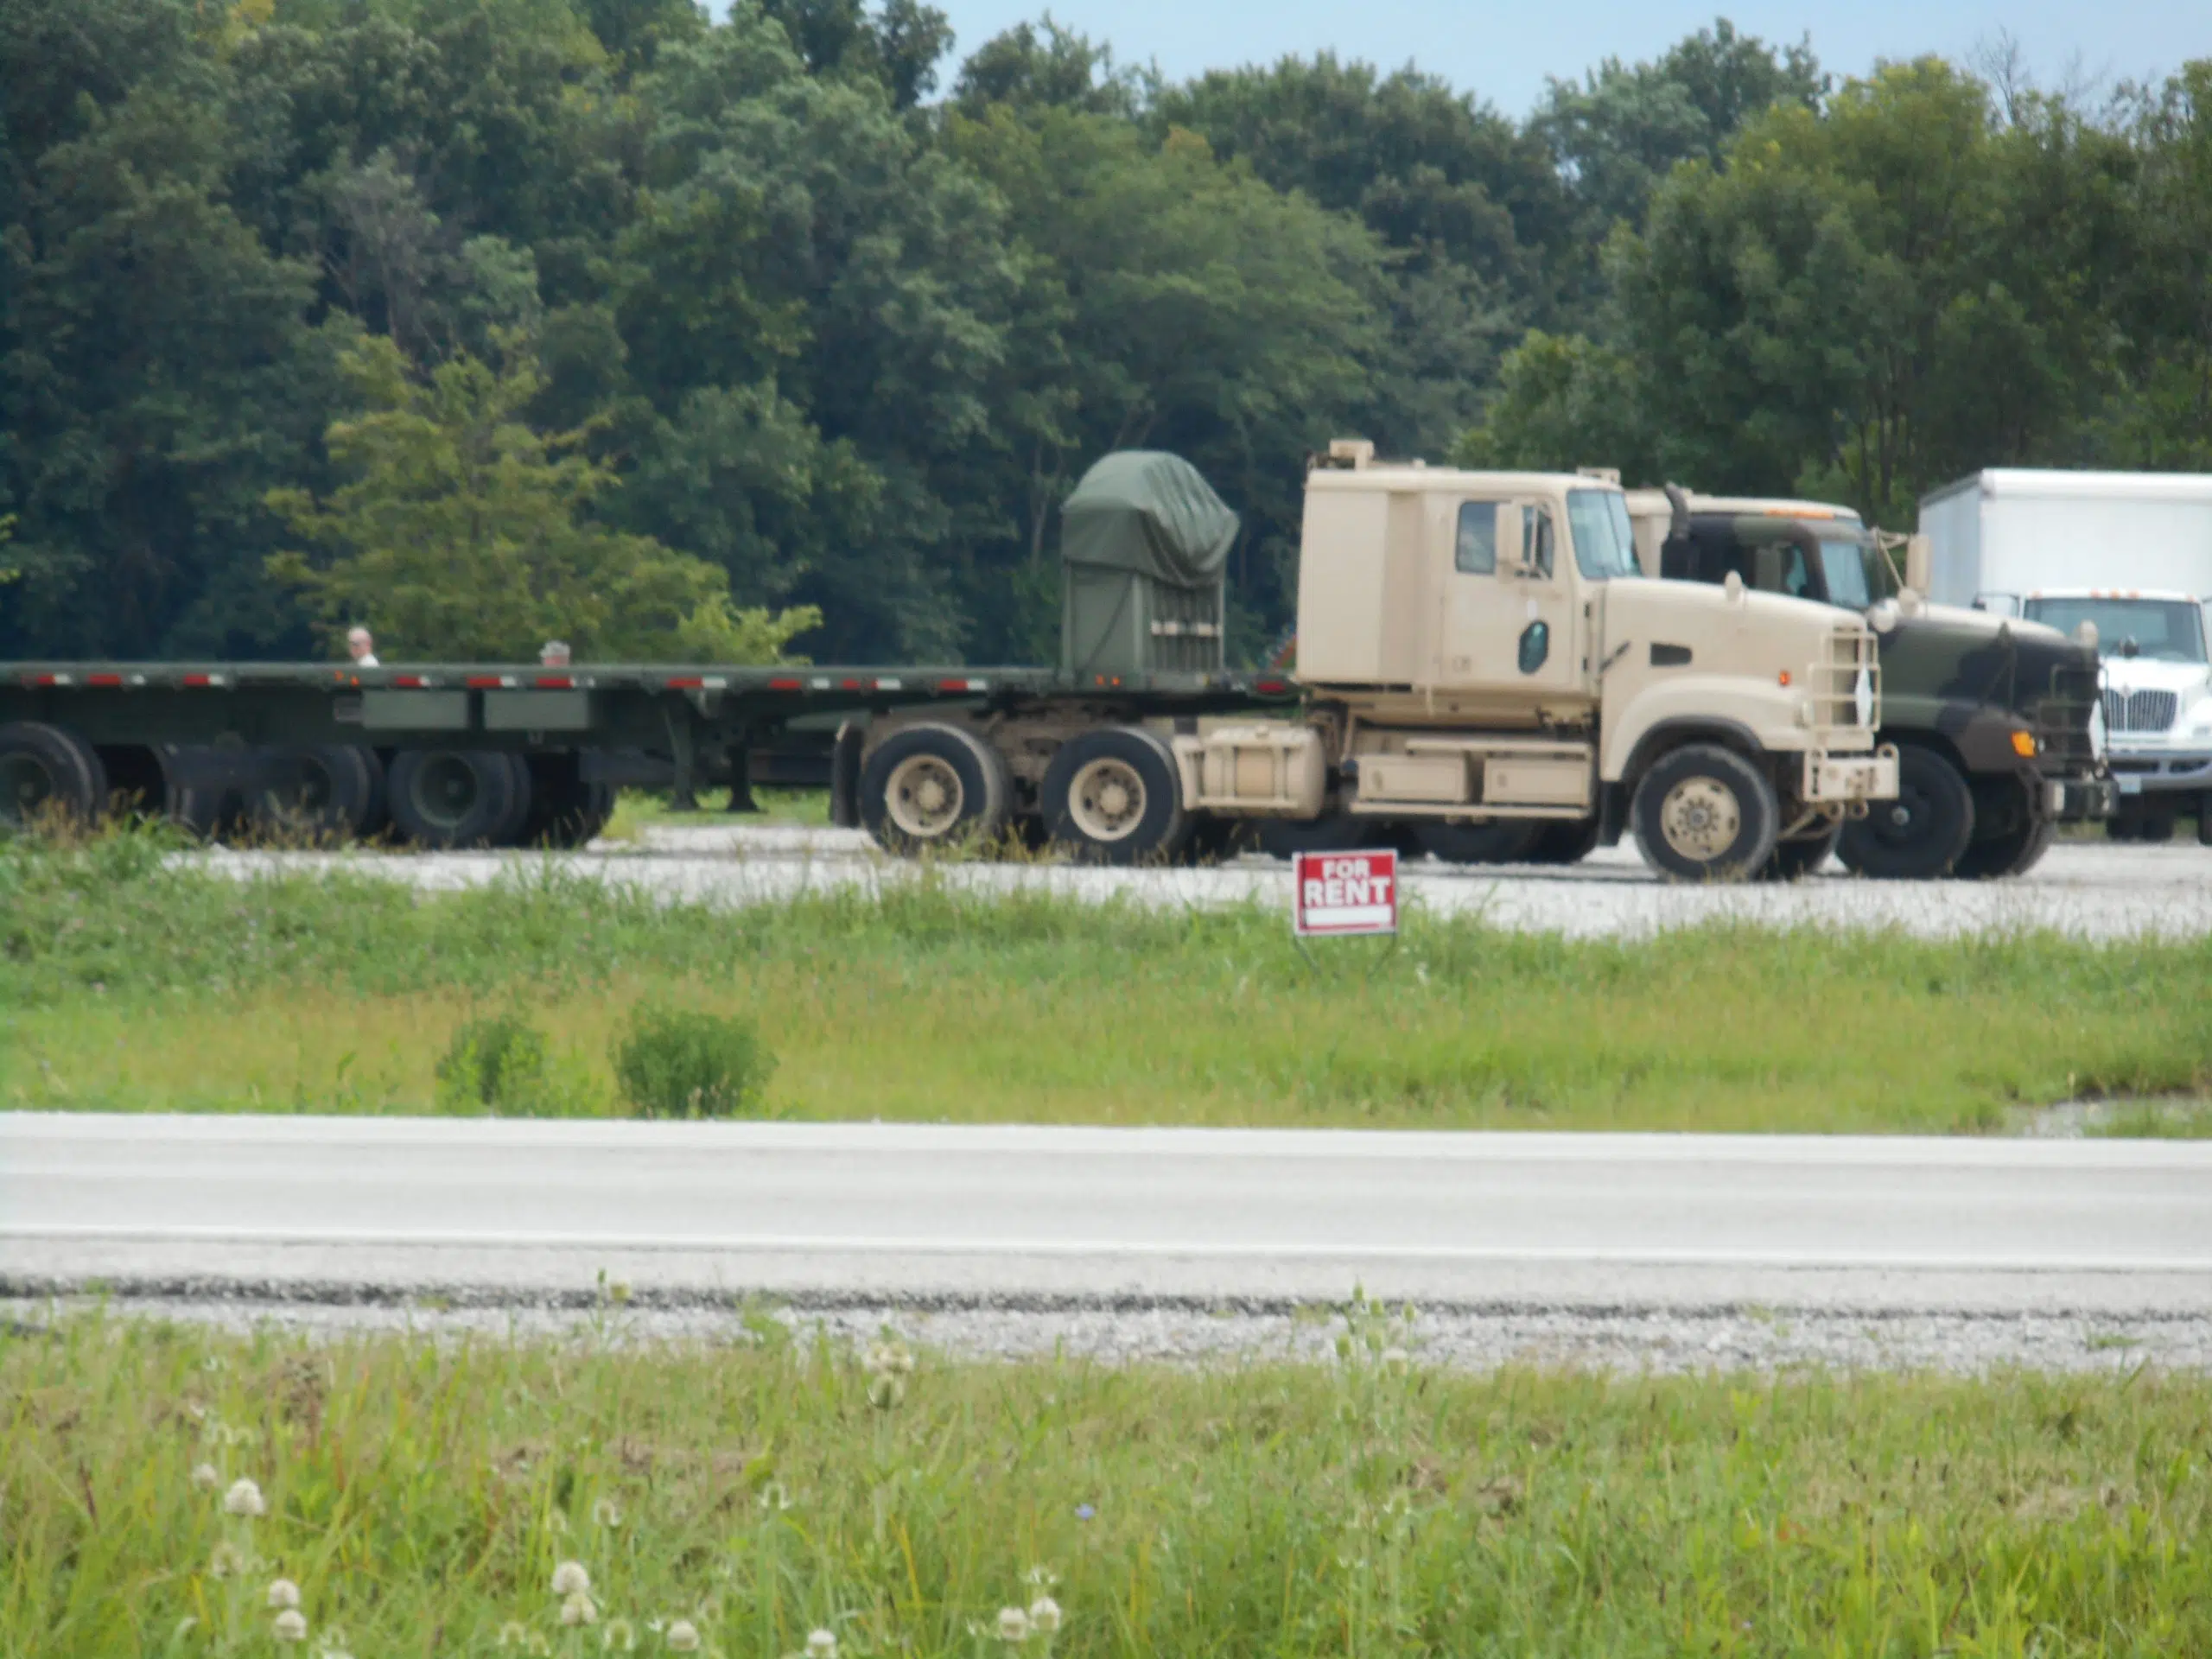 Military, Federal, State Authorities in Vandalia, Fayette Co today